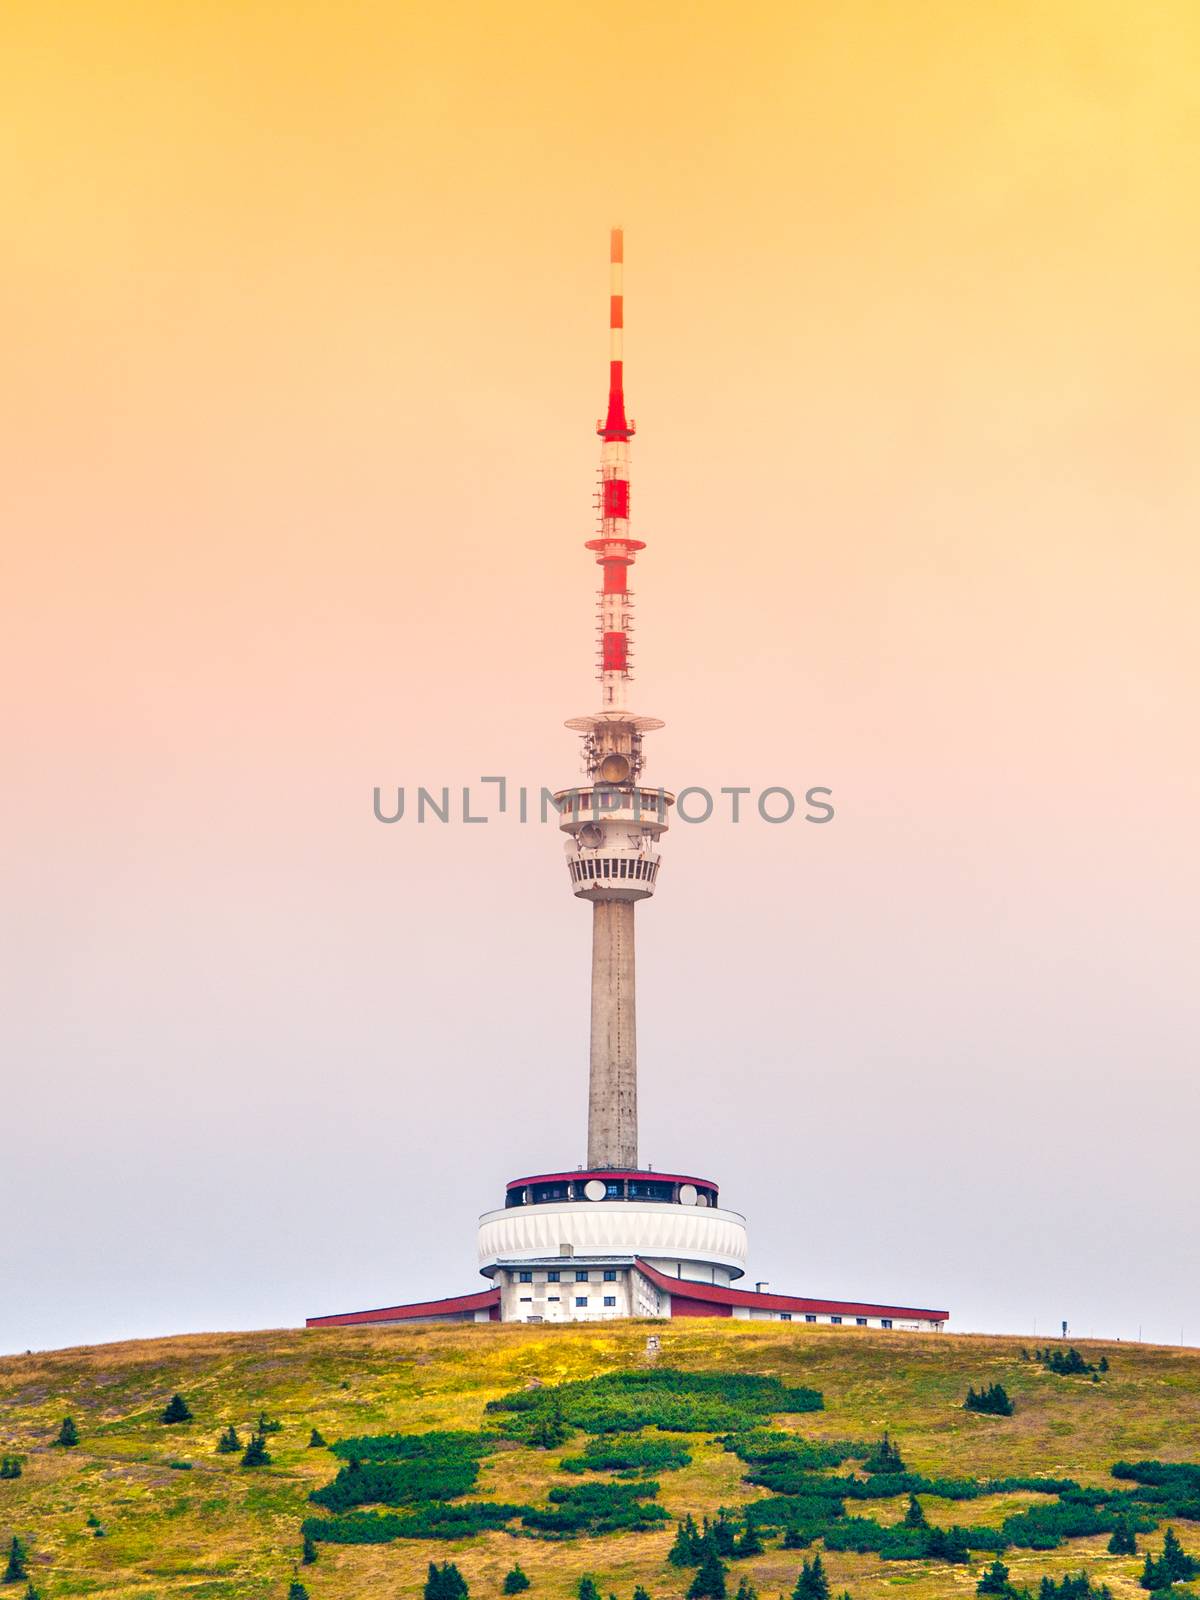 TV transmitter and lookout tower on the summit of Praded Mountain, Hruby Jesenik, Czech Republic by pyty